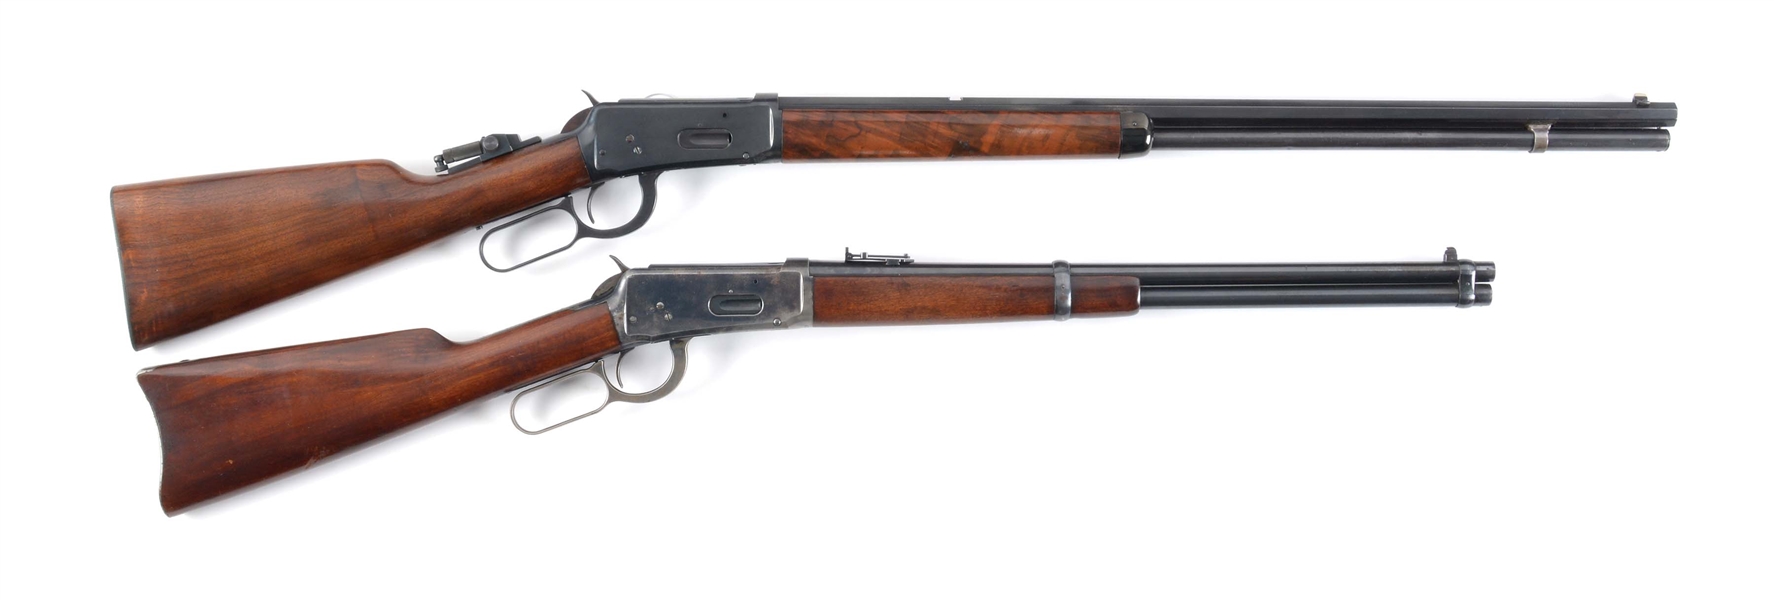 (C) LOT OF TWO: WINCHESTER 1894 .25-35 LEVER ACTION RIFLE (1898) AND WINCHESTER 1894 .35-35 LEVER ACTION RIFLE (1908).